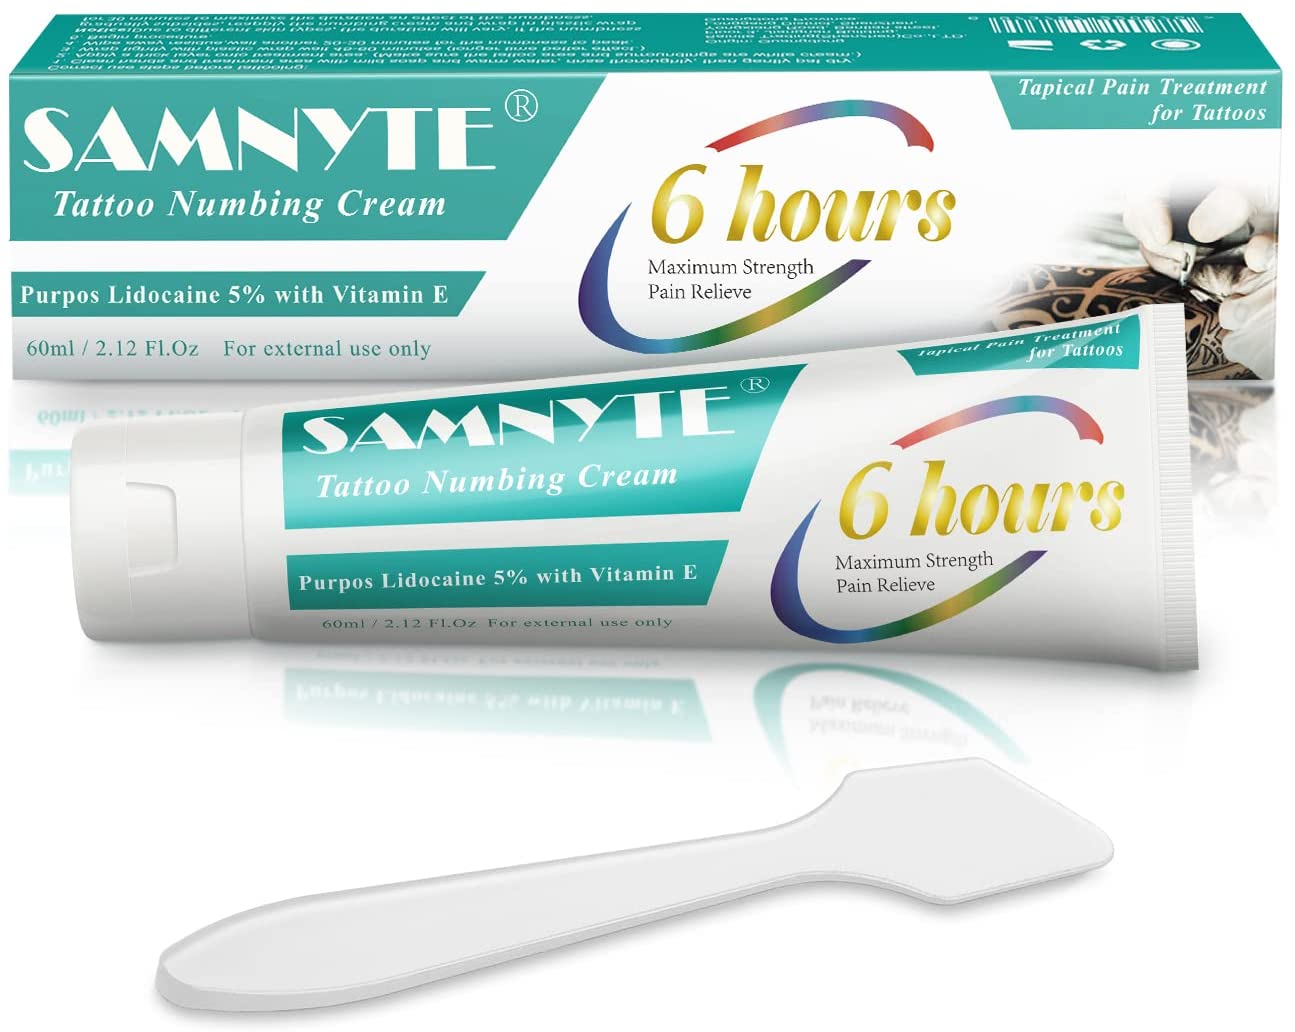 Buy WIth US | Samnyte Tattoo Numbing Cream with 5% Lidocaine & Vitamin E |  6 Hrs Max Strength Pain Relieve   (60 ml)